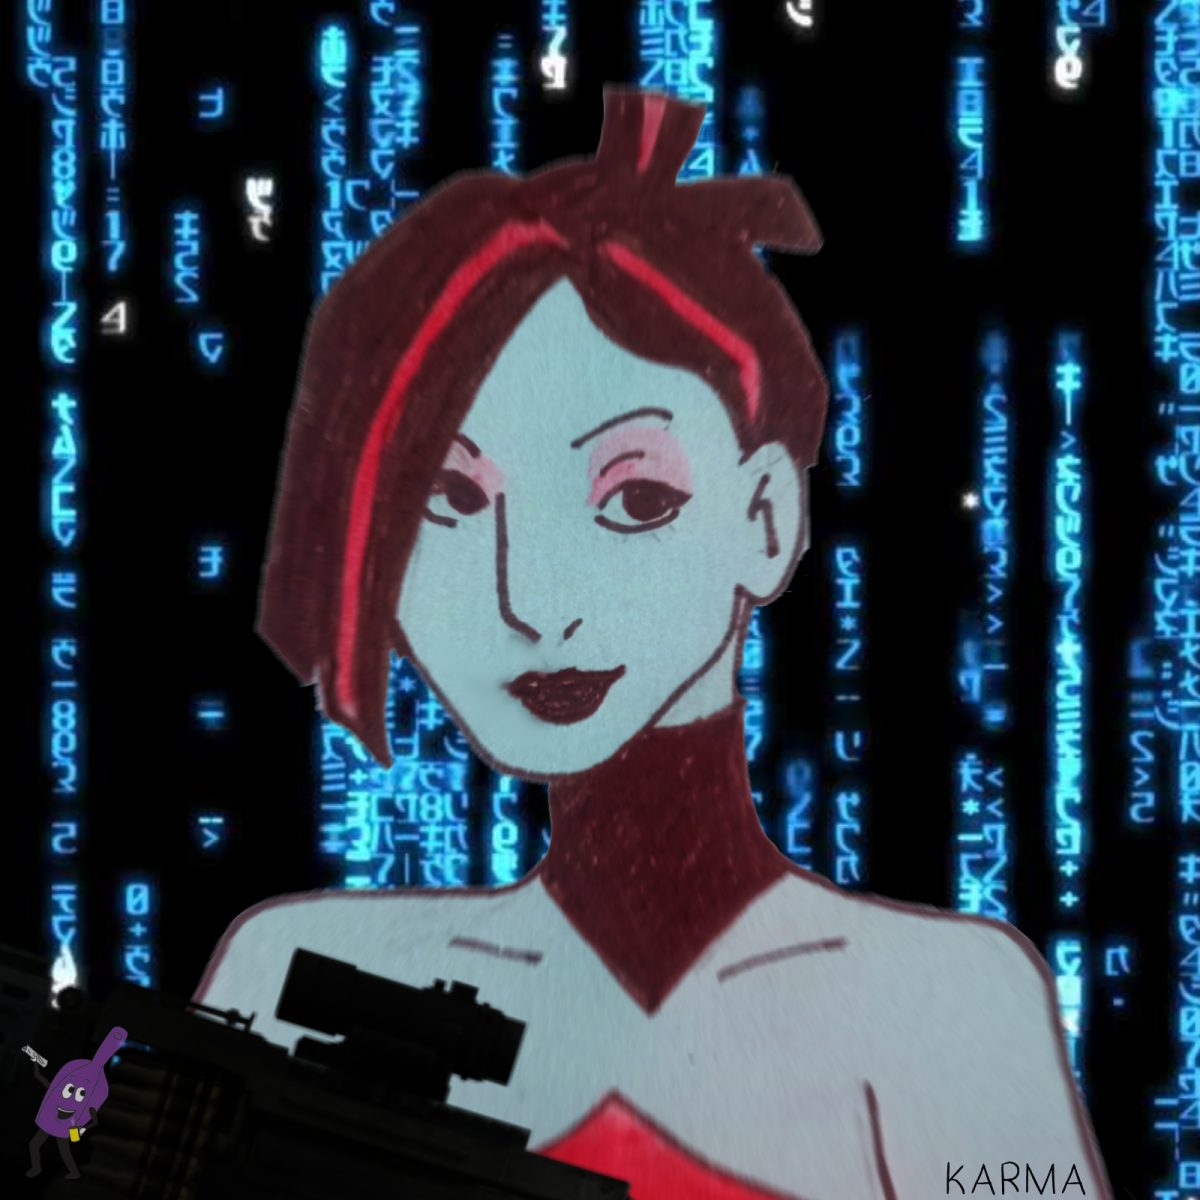 A colored illustration of a character from The Matrix, with a black background and blue lines of text that resembles coding lines.